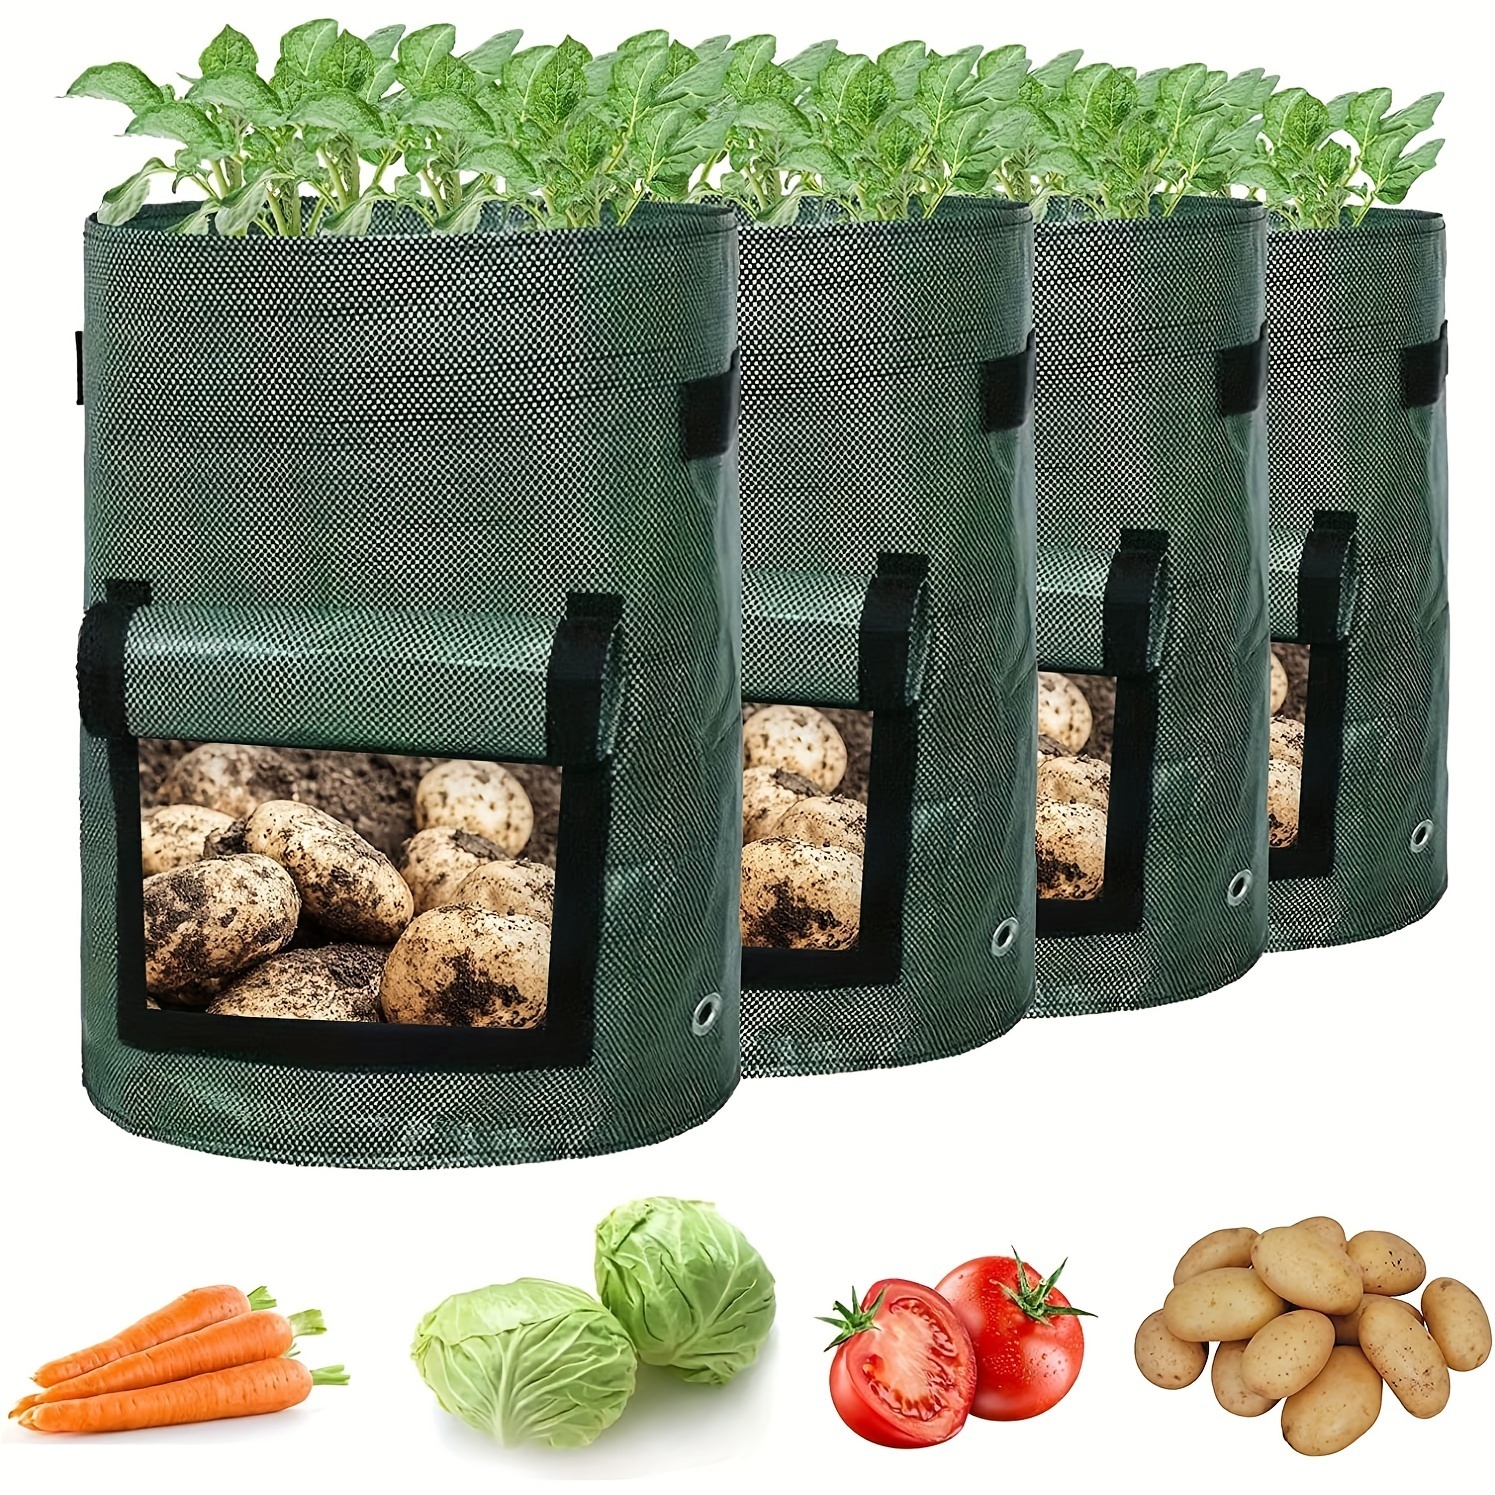 

4pcs Potato Grow Bags, Potato Planters With Flap And Handles, Vegetables Garden Planting Bags For Onion, Fruits, Tomato, Carrot (7 Gallon)